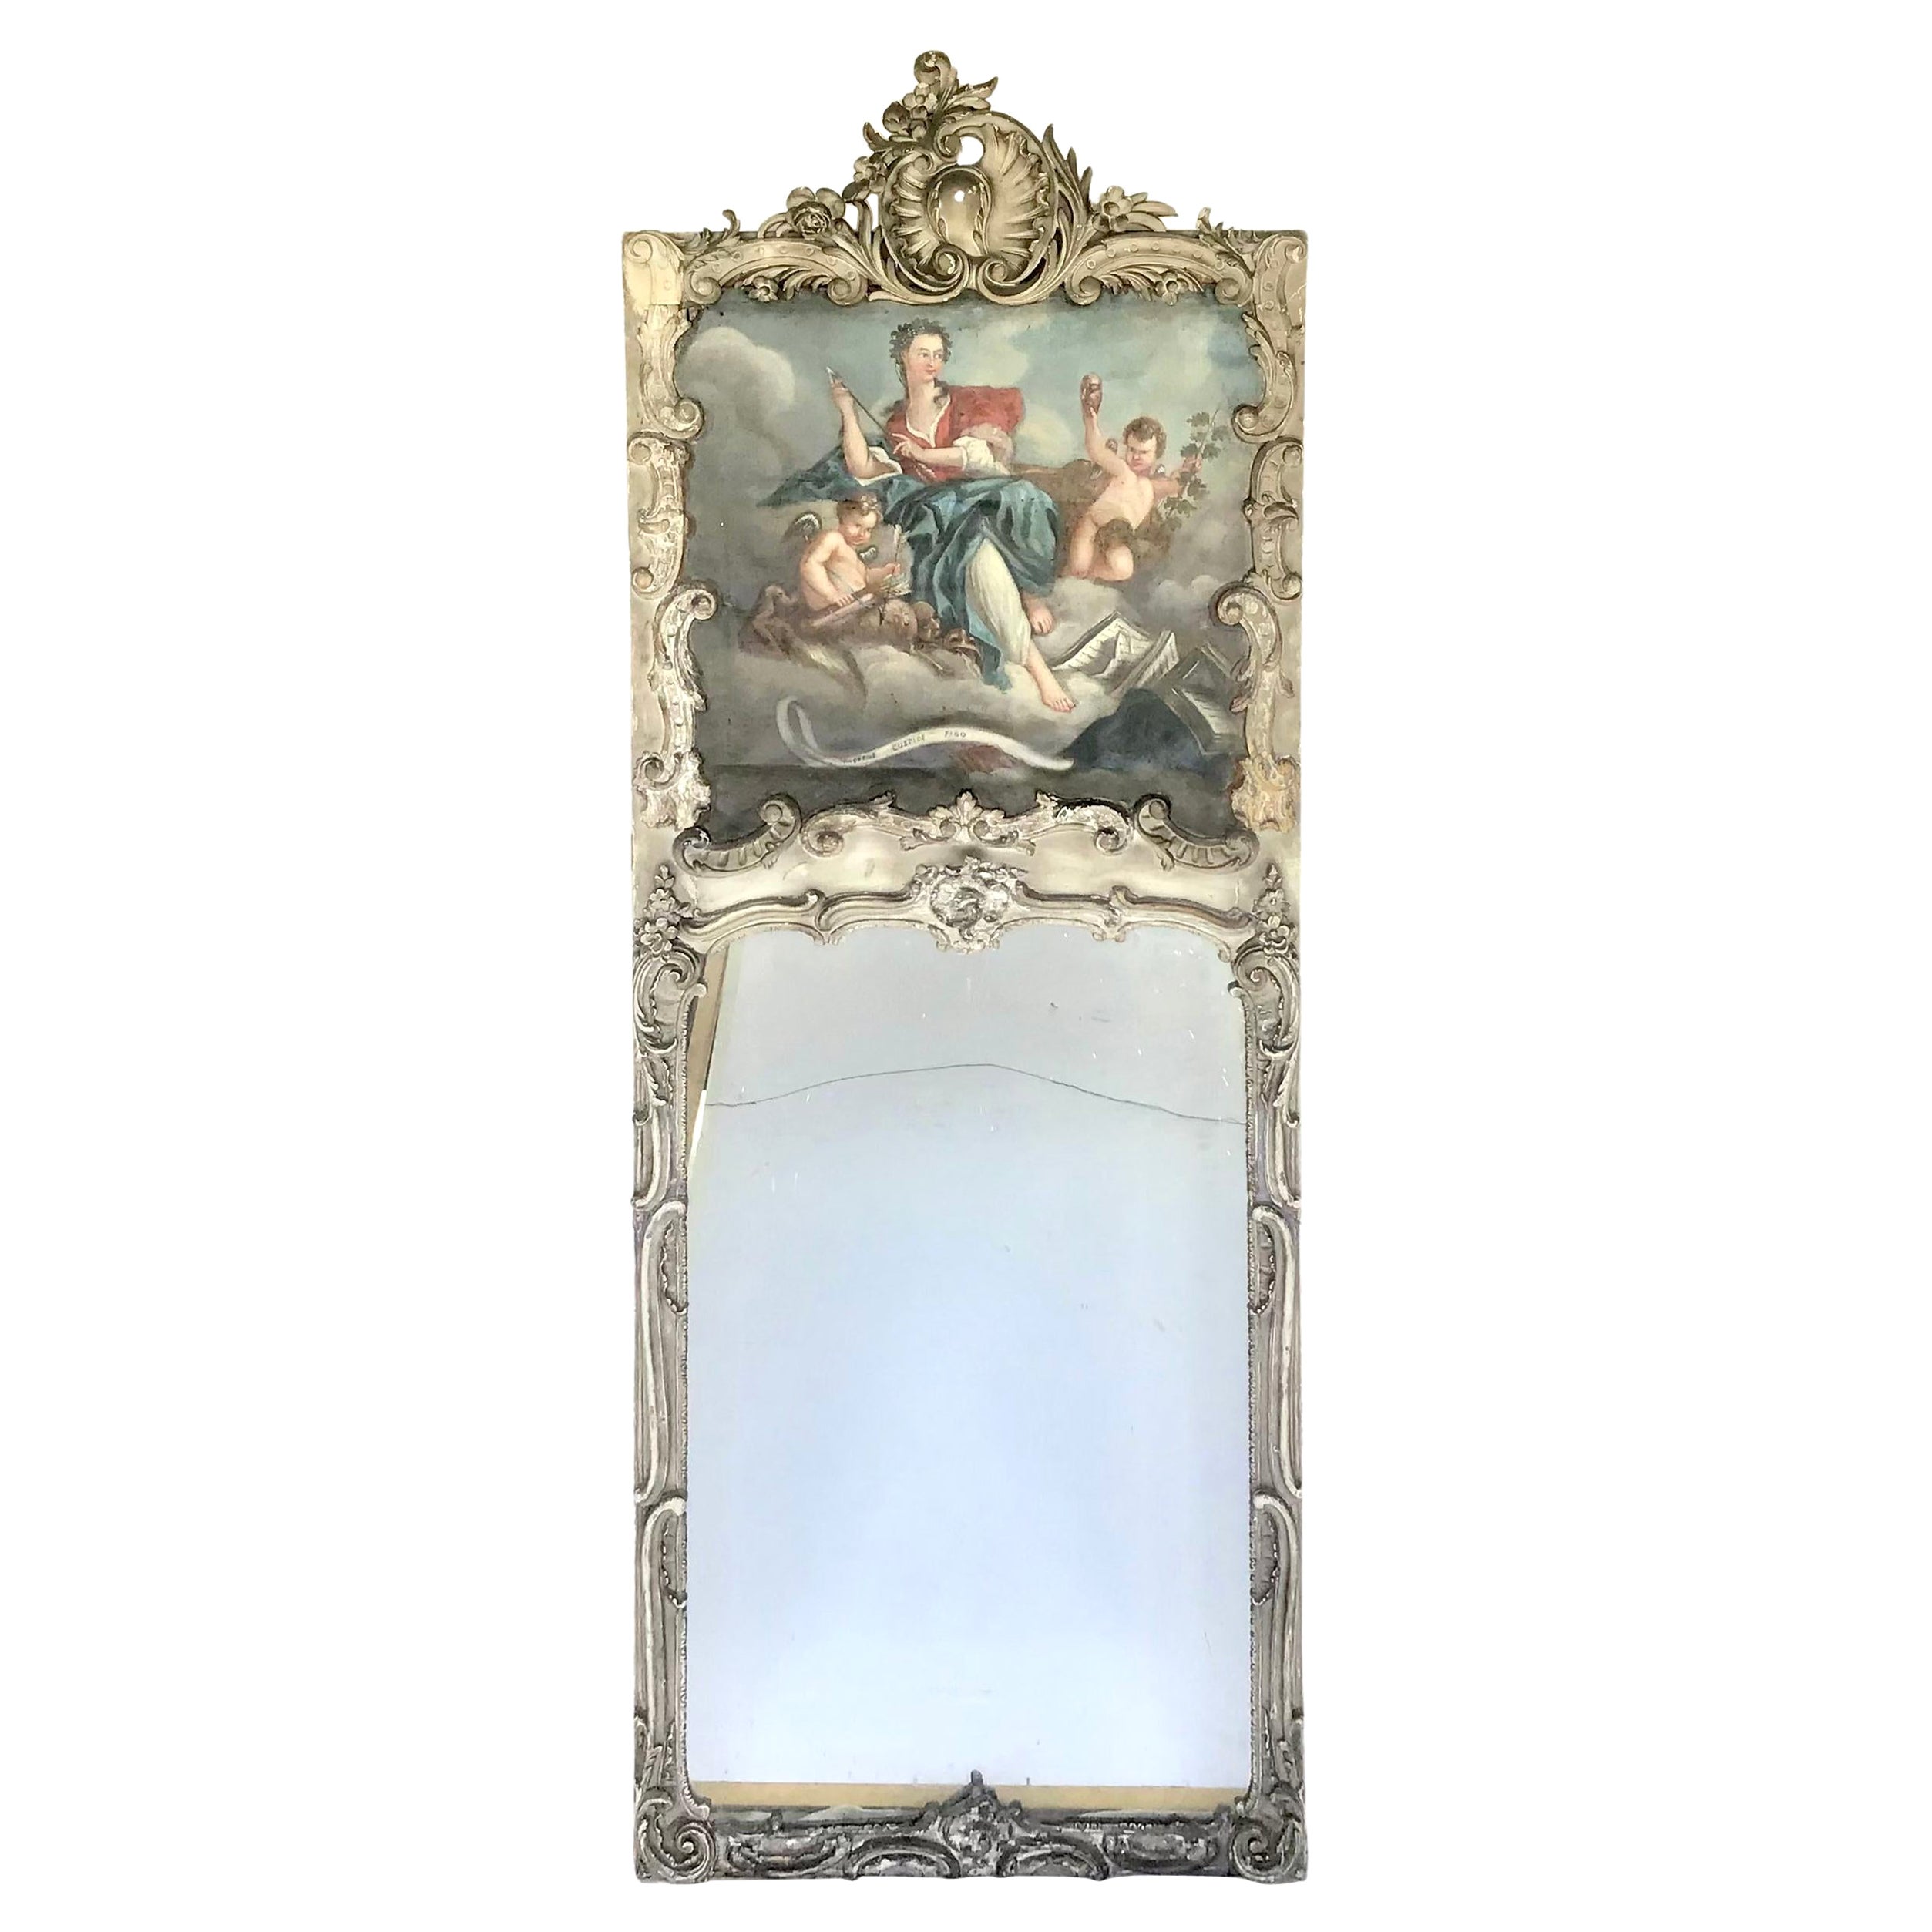 French Louis XV Painted Trumeau